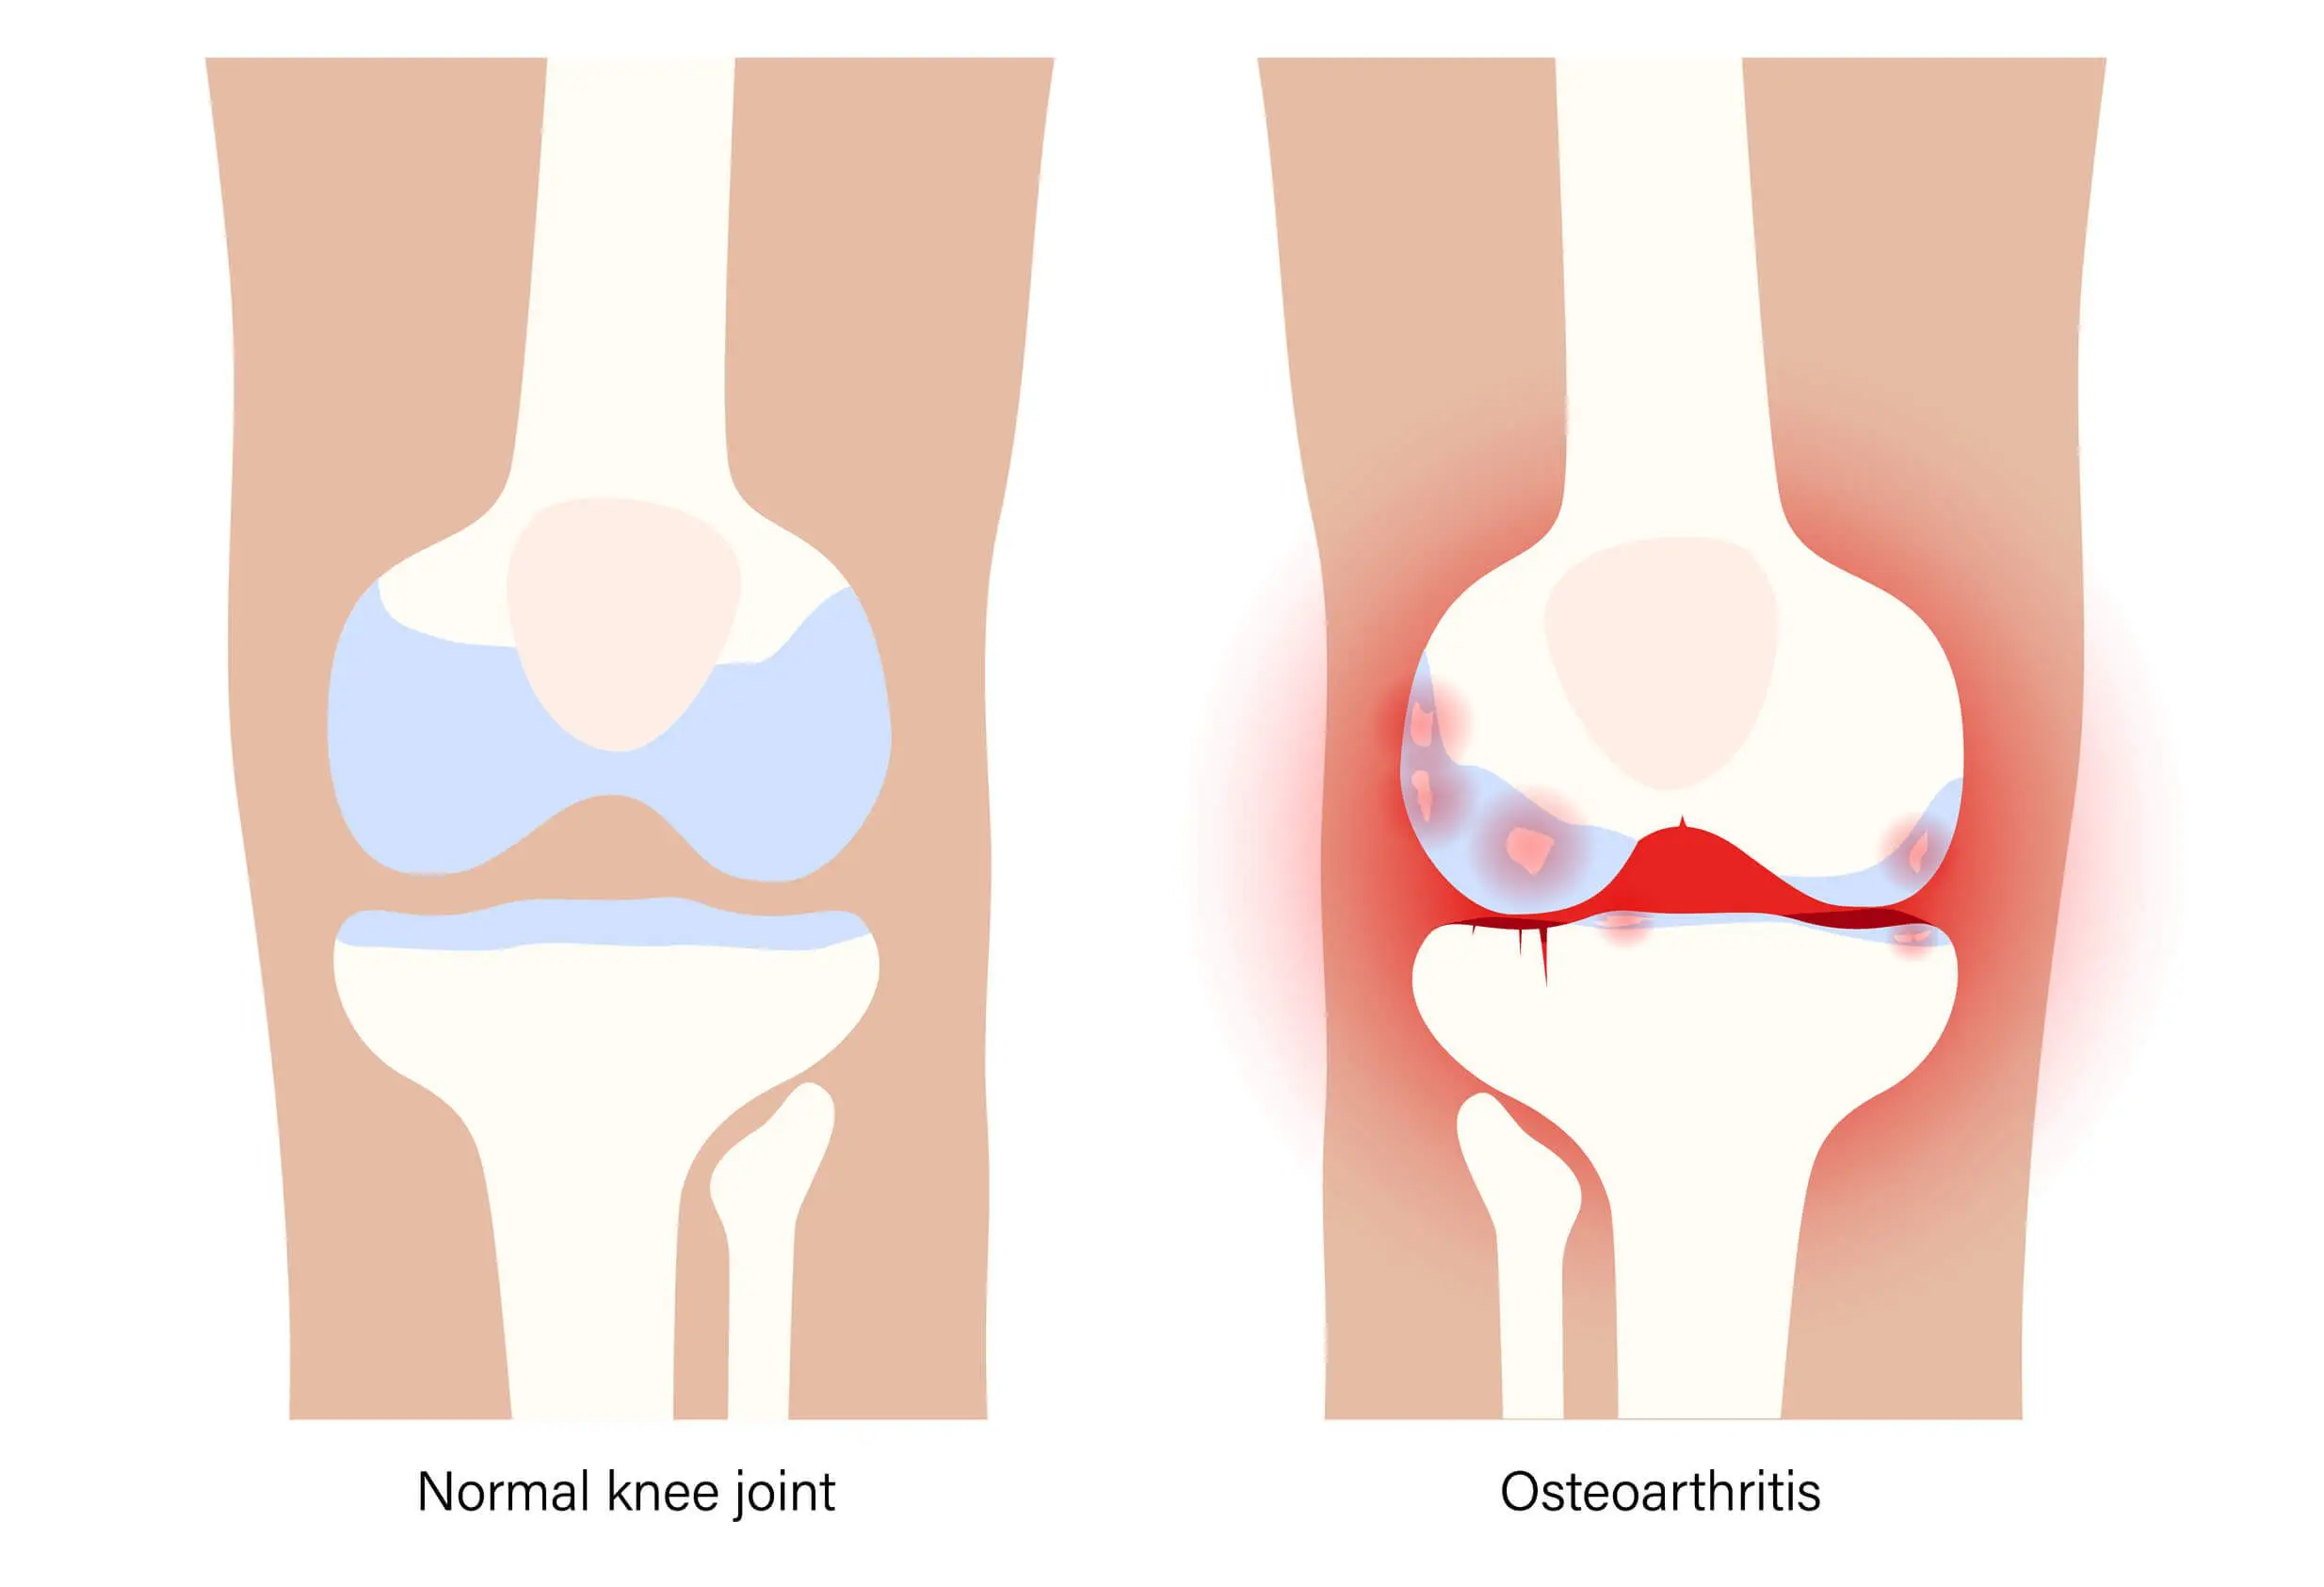 Osteoarthritis leads to inflammation in joints.